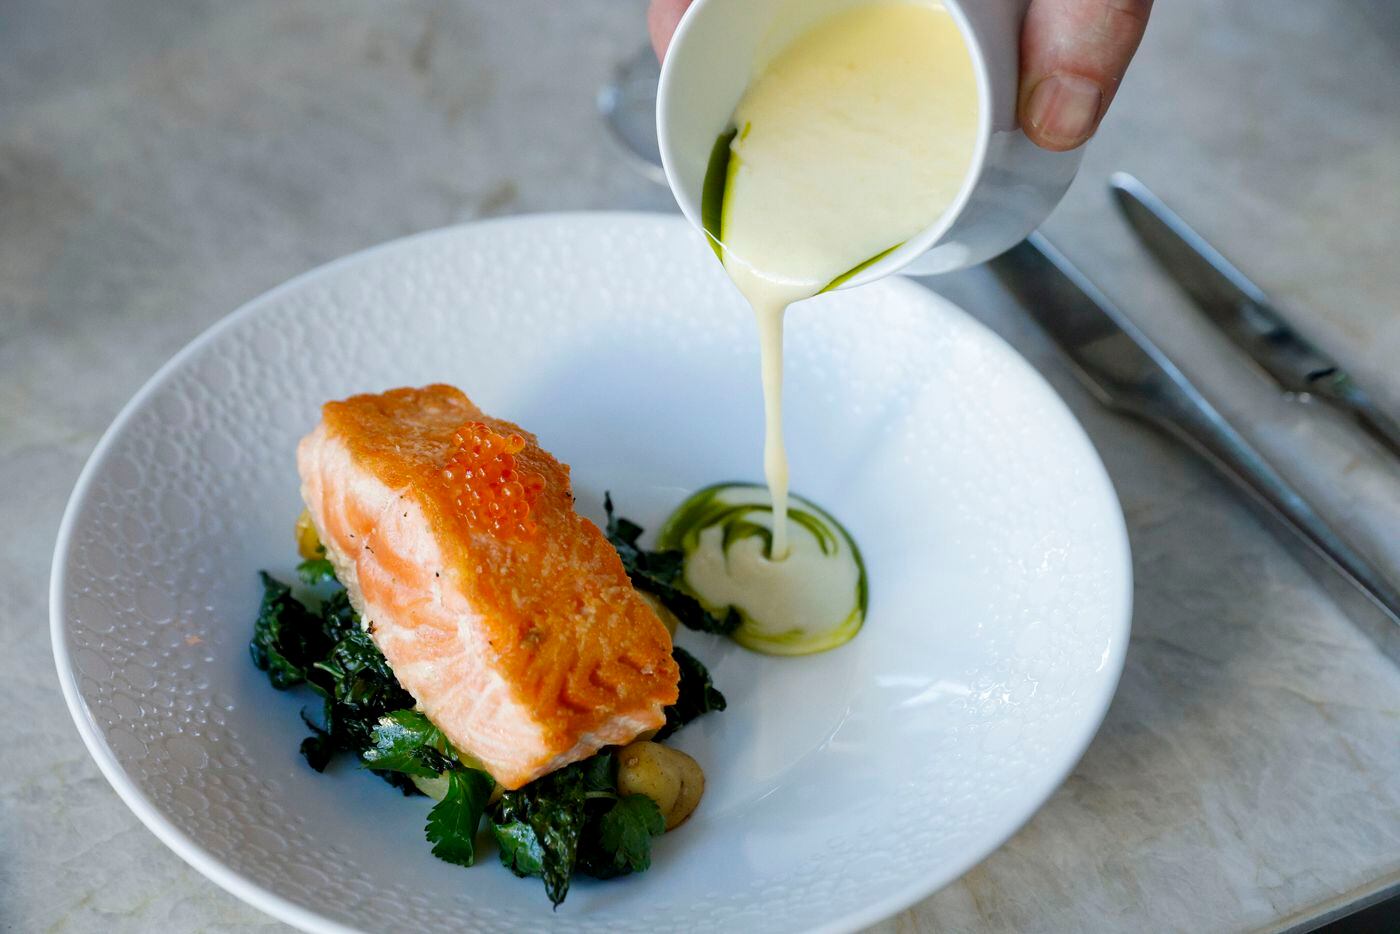 Roasted salmon with beurre blanc and kombu oil poured table side at Mirador restaurant in...